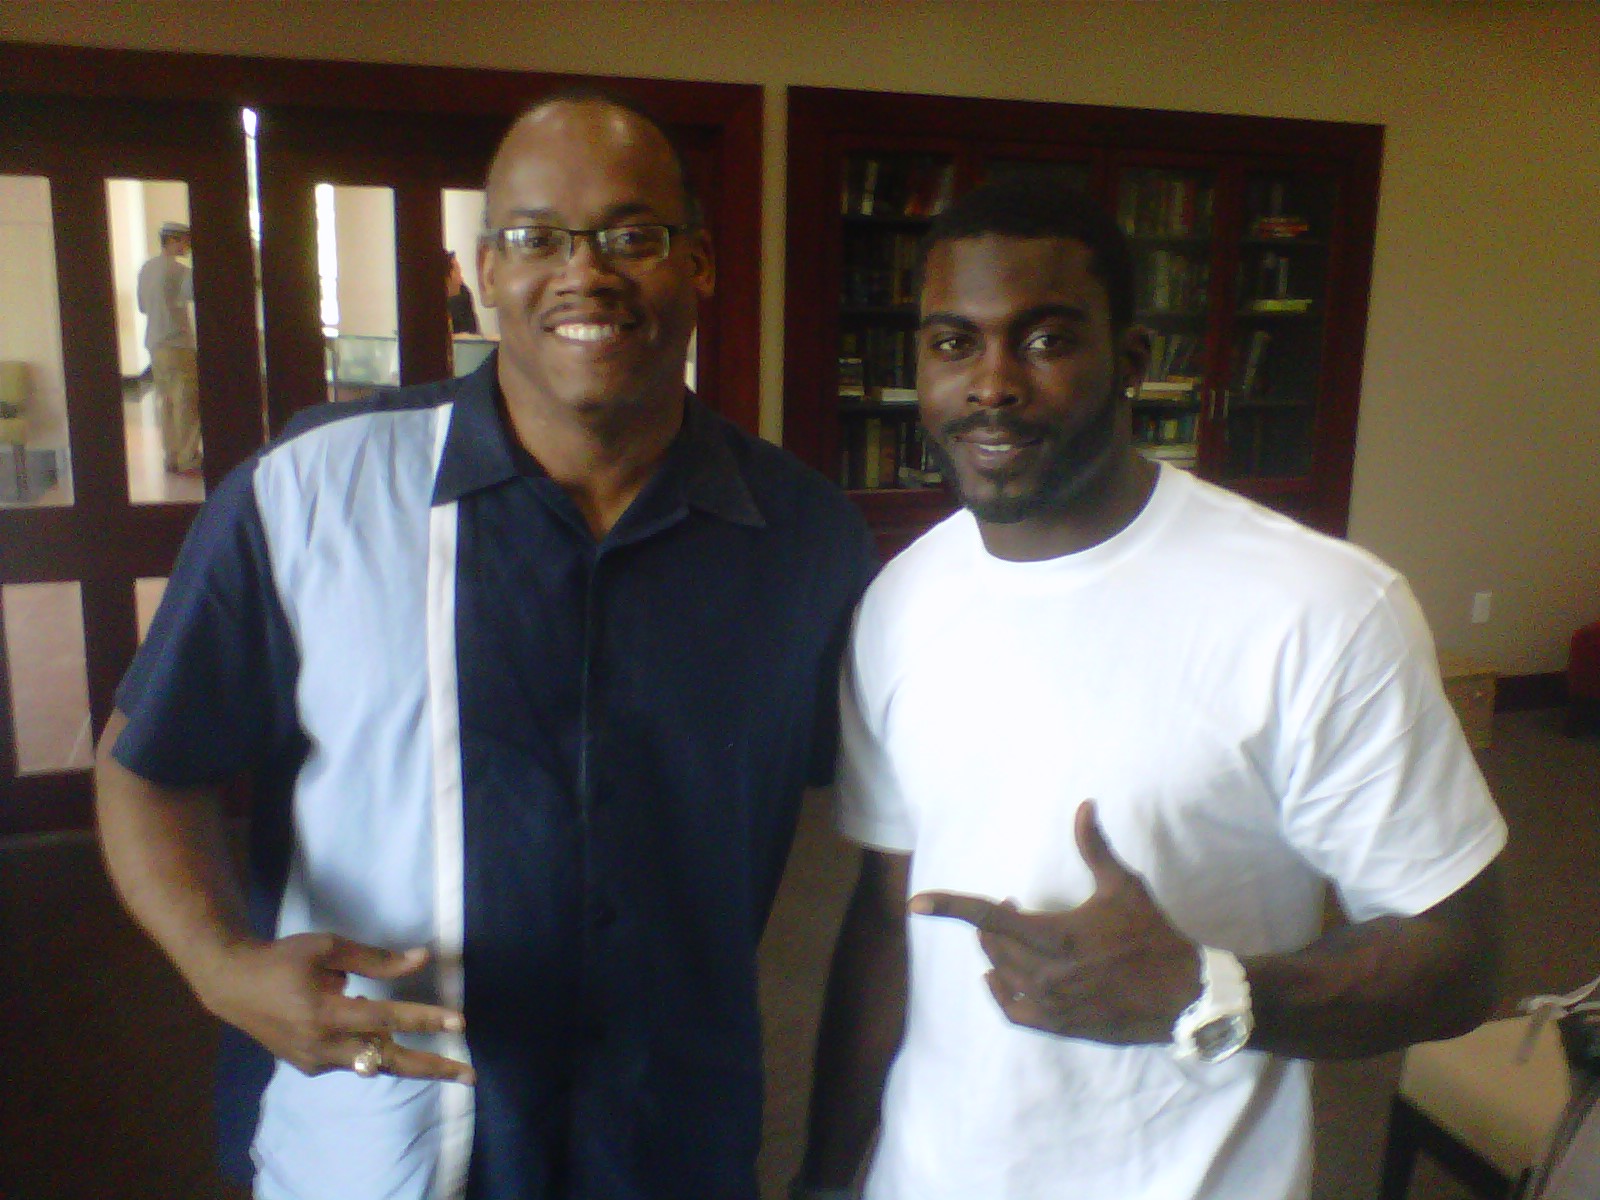 Producer/Director Greg Carter and Philadelphia Eagles star quarterback Michael Vick. Wrapping up a production meeting for the feature documentary, Michael Vick: Giving Back